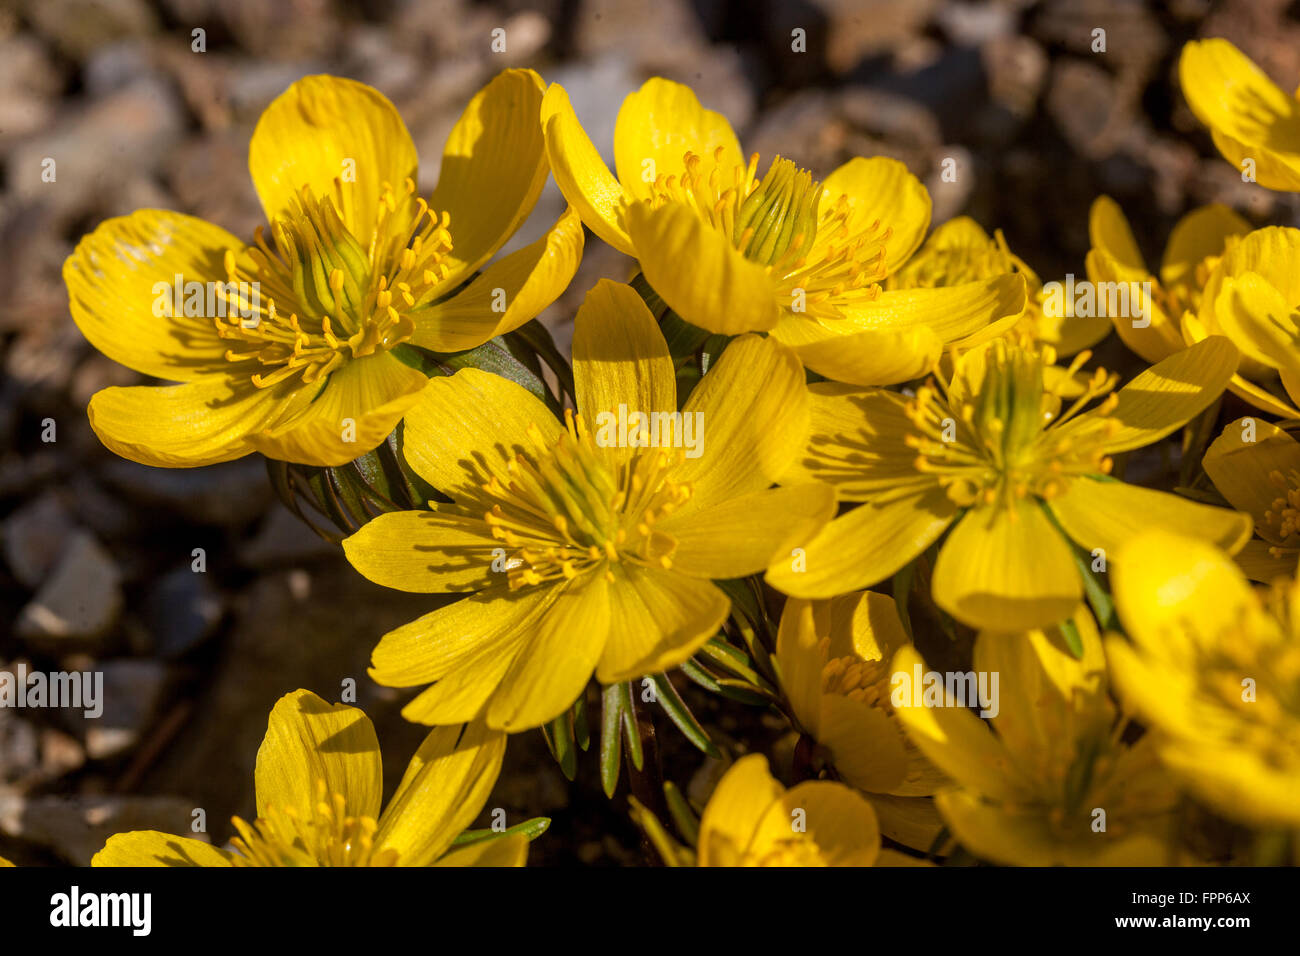 Eranthis hyemalis Cilicica, winter aconite blooming spring flowers Winter Hellebore,Eranthis cilicica Stock Photo